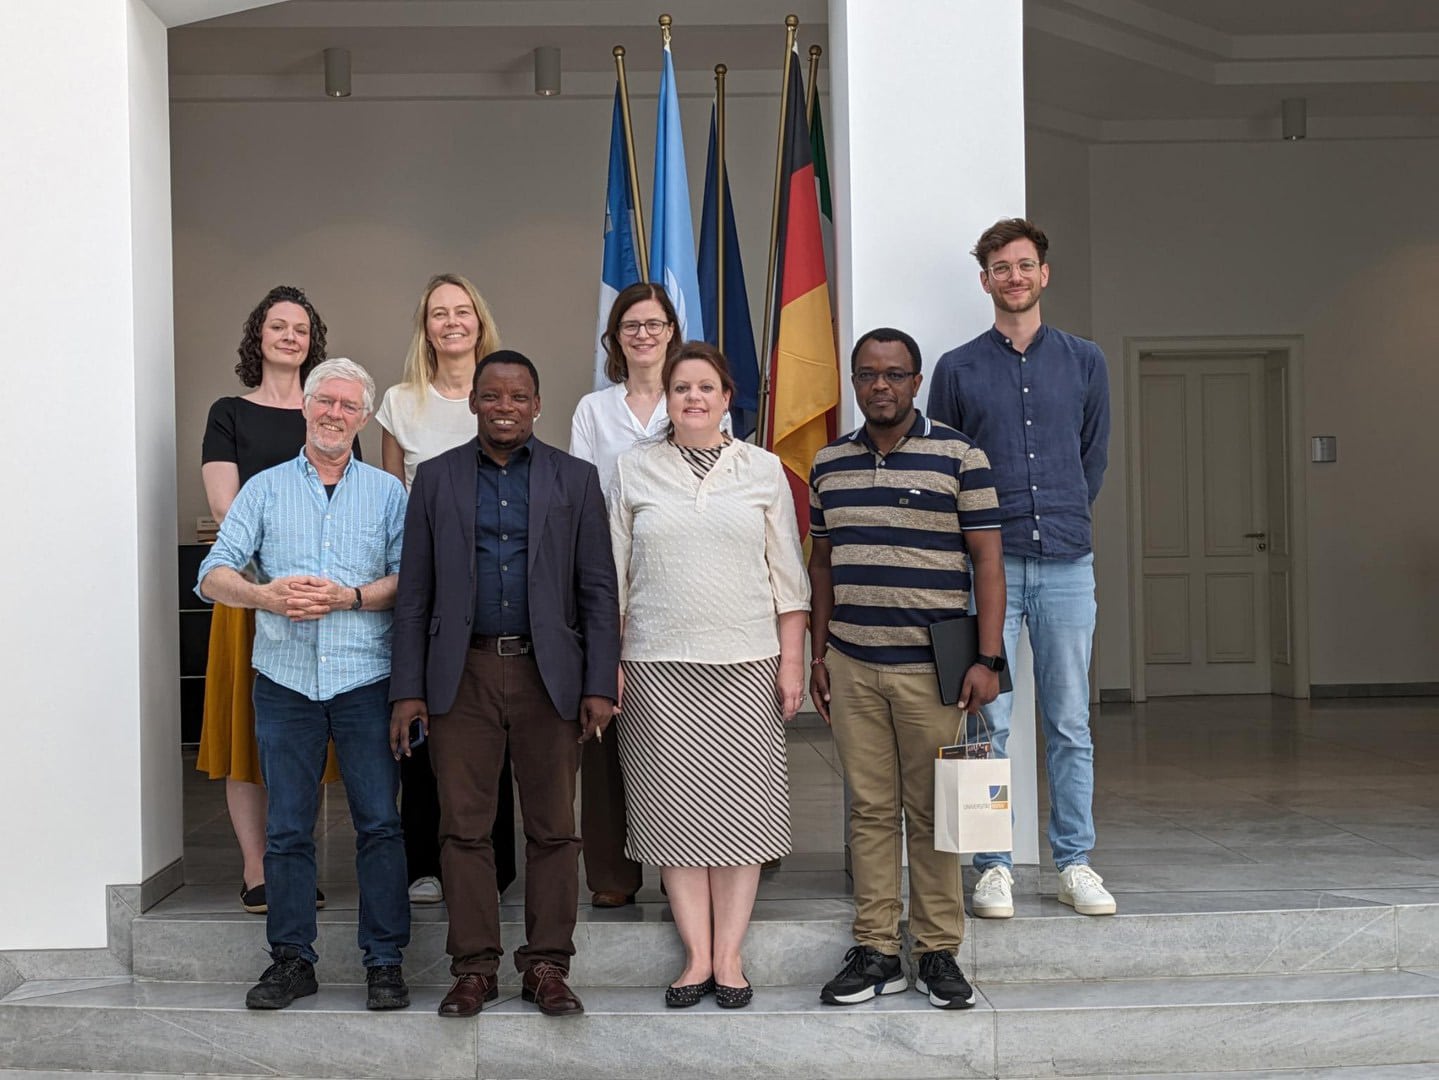 delegations of mzumbe university and the departemnt of geography at the university of bonn